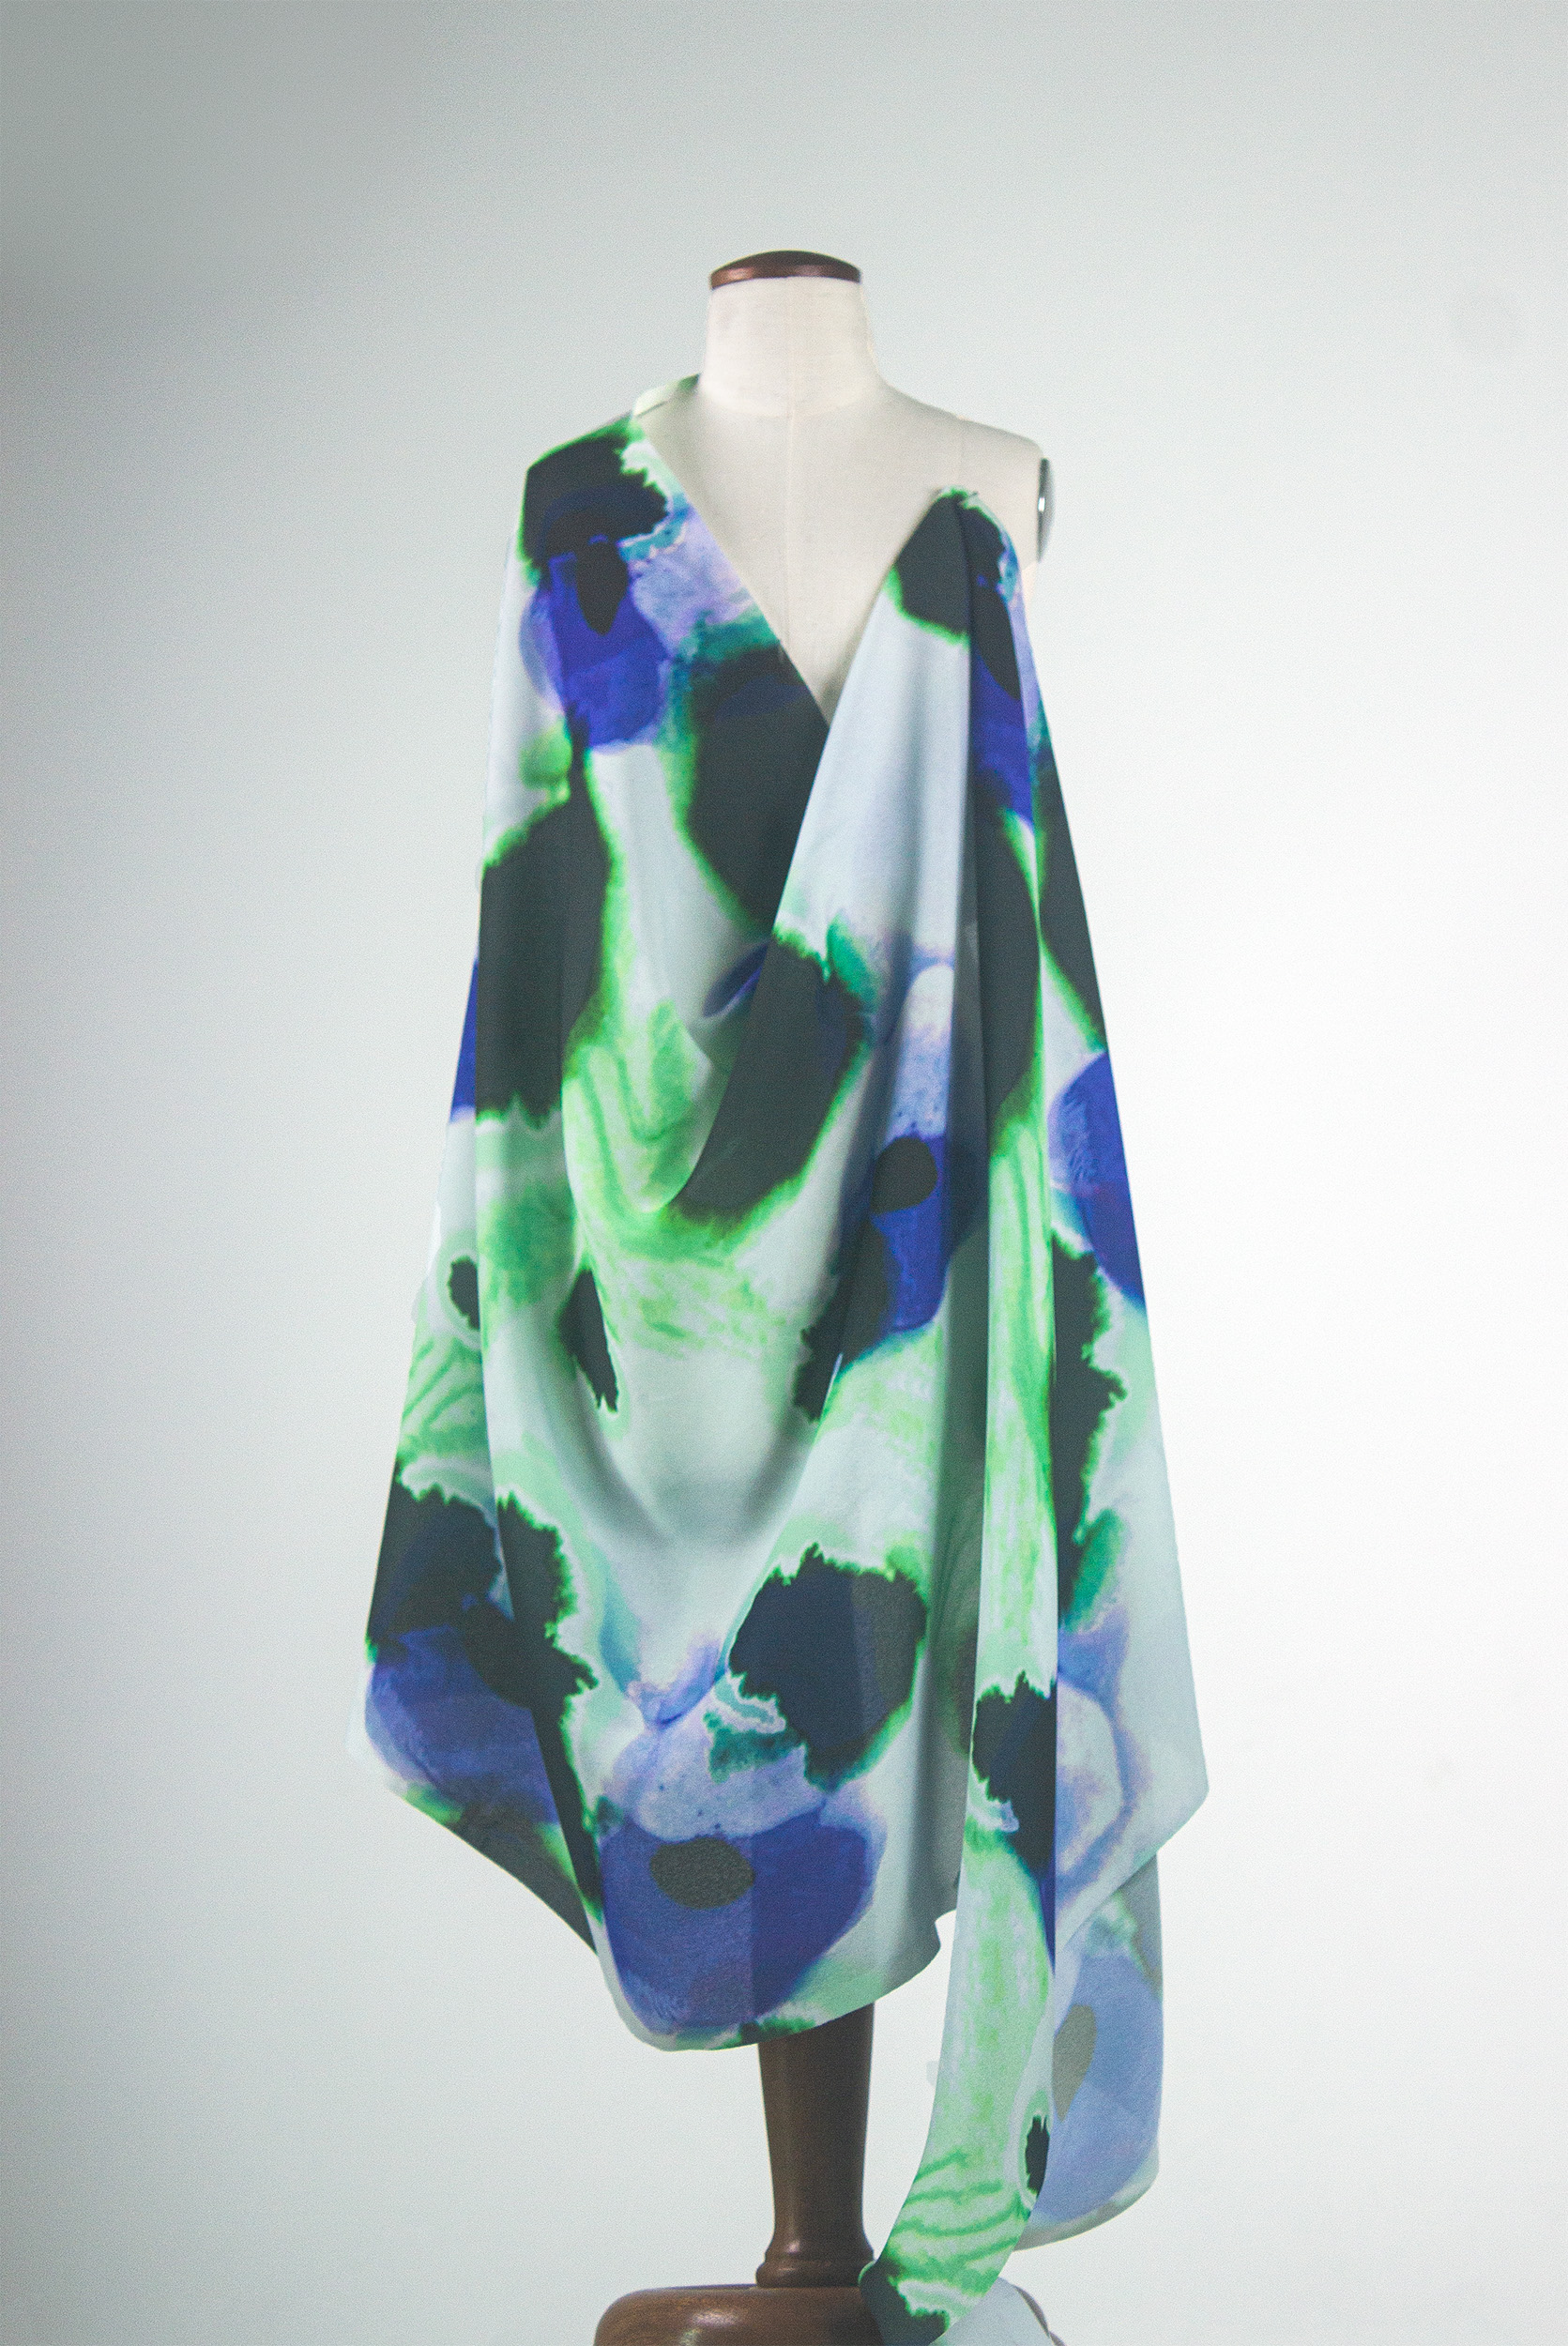 BA Textile Design work by Seren Faber displaying repeat print draped onto a mannequin.